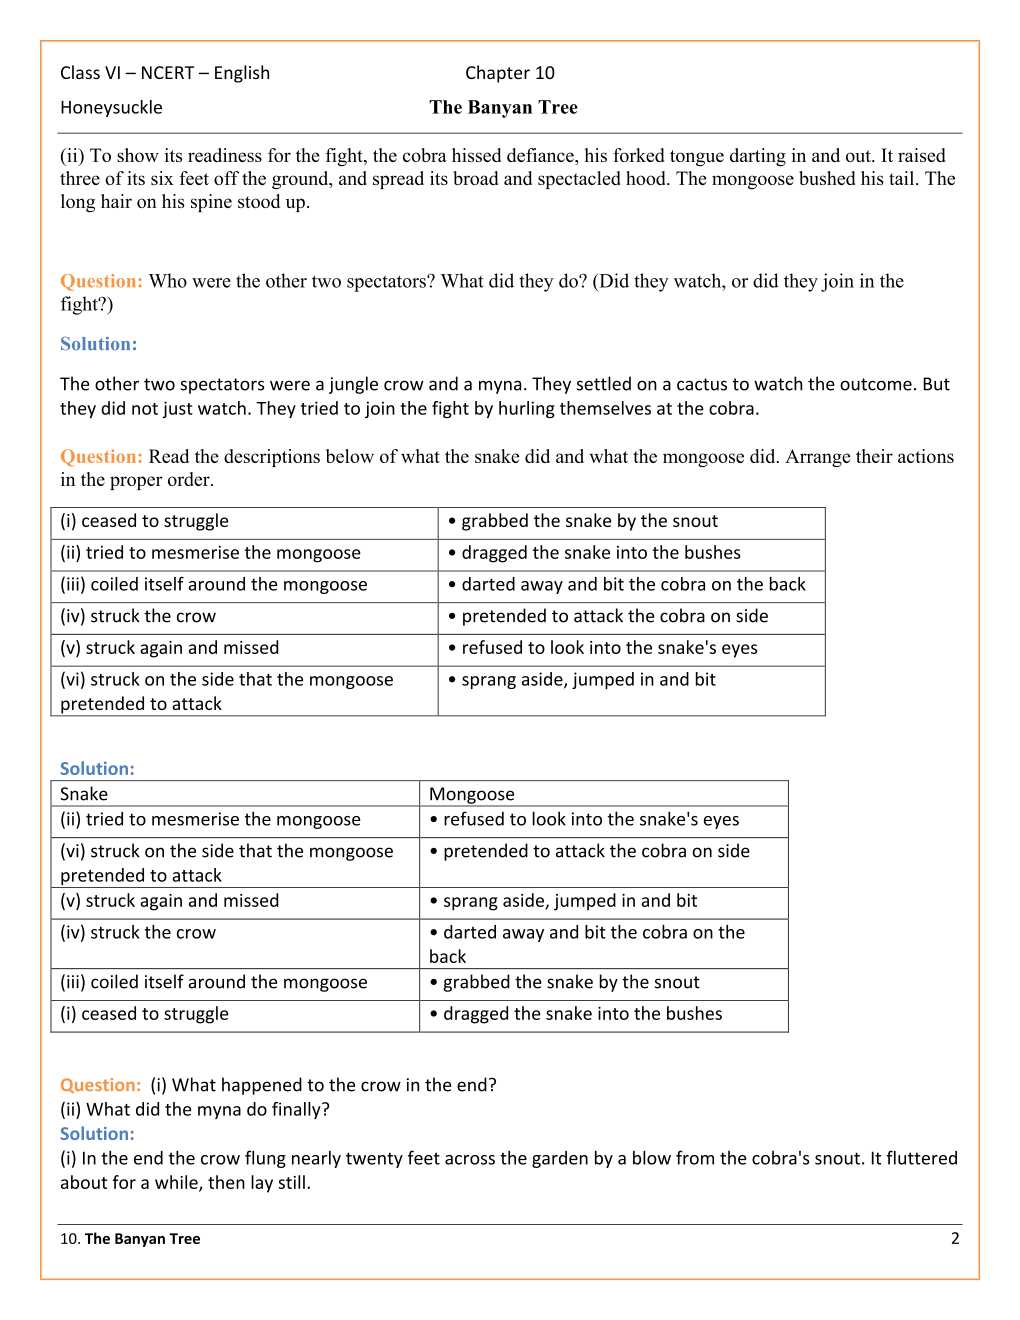 NCERT Solutions For Class 6 English Honeysuckle Chapter 10